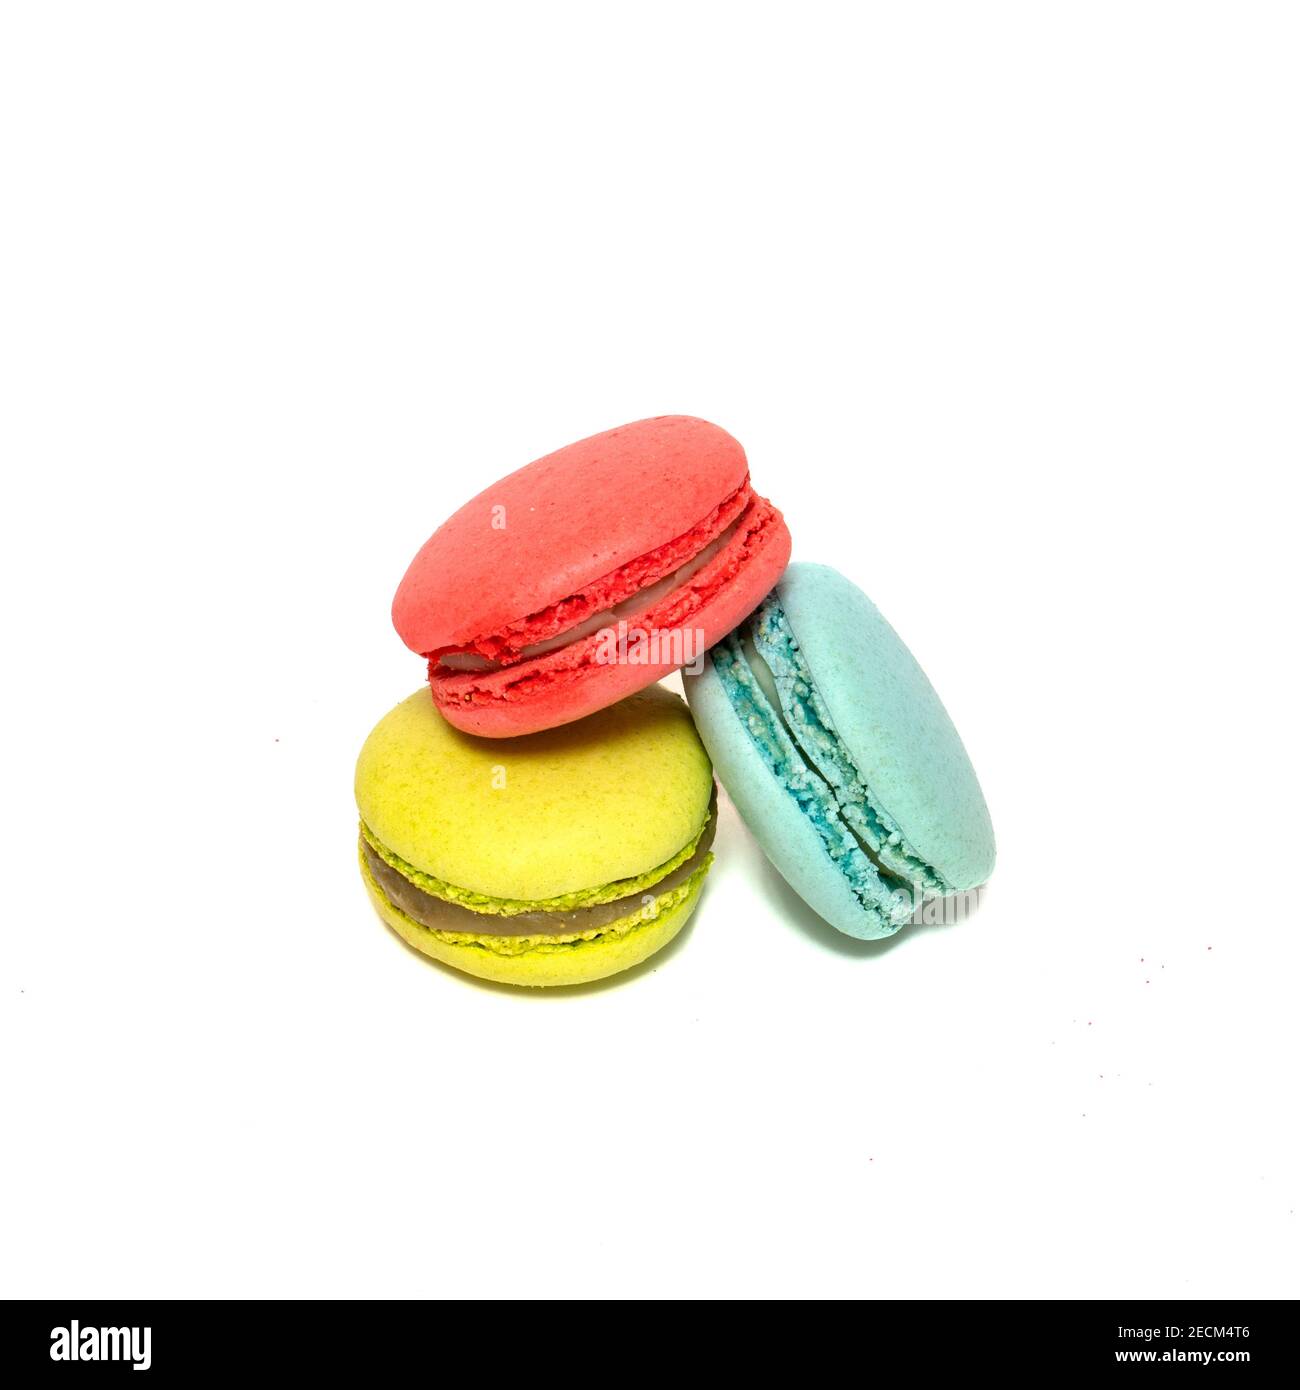 Macaroons isolated in white background. Colorful french macarons close-up. Tasty sweet color macaroon, bakery concept. Stock Photo